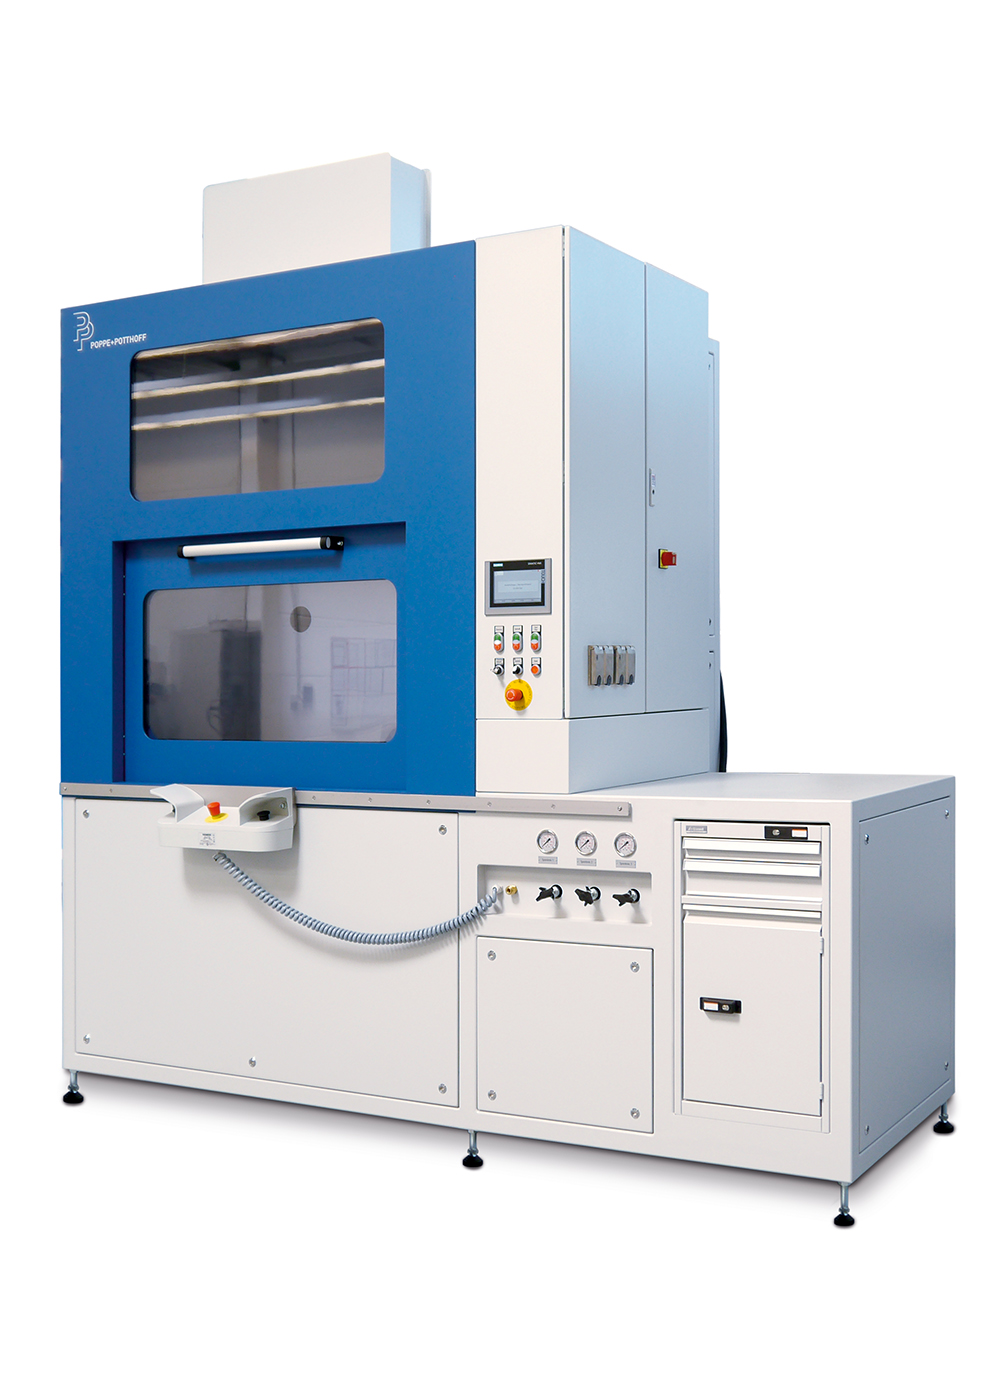 Autofrettage machine to increase fatigue strength of metal components